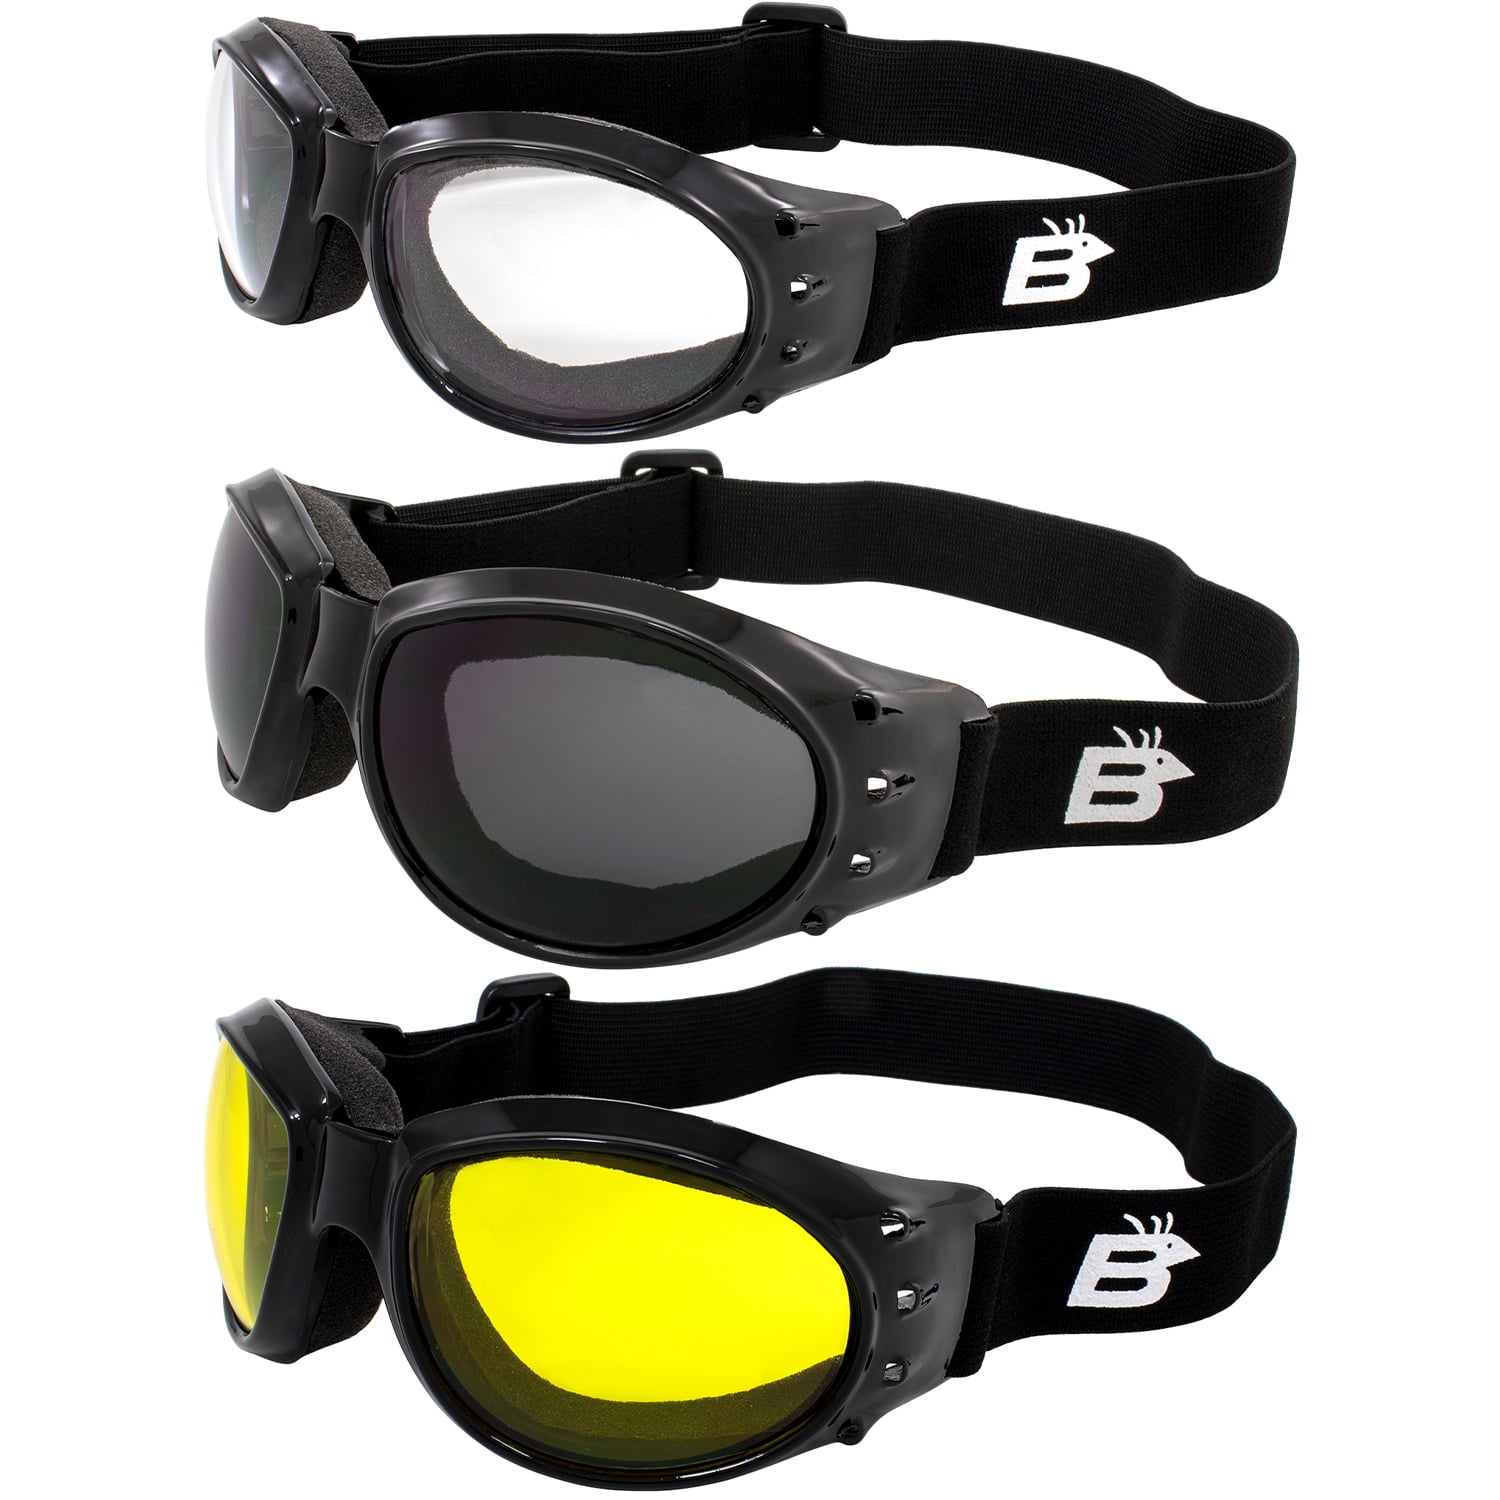 Comfortable Details about   3 Pair COMBO Motorcycle Riding Glasses Smoke Clear Yellow Padded 